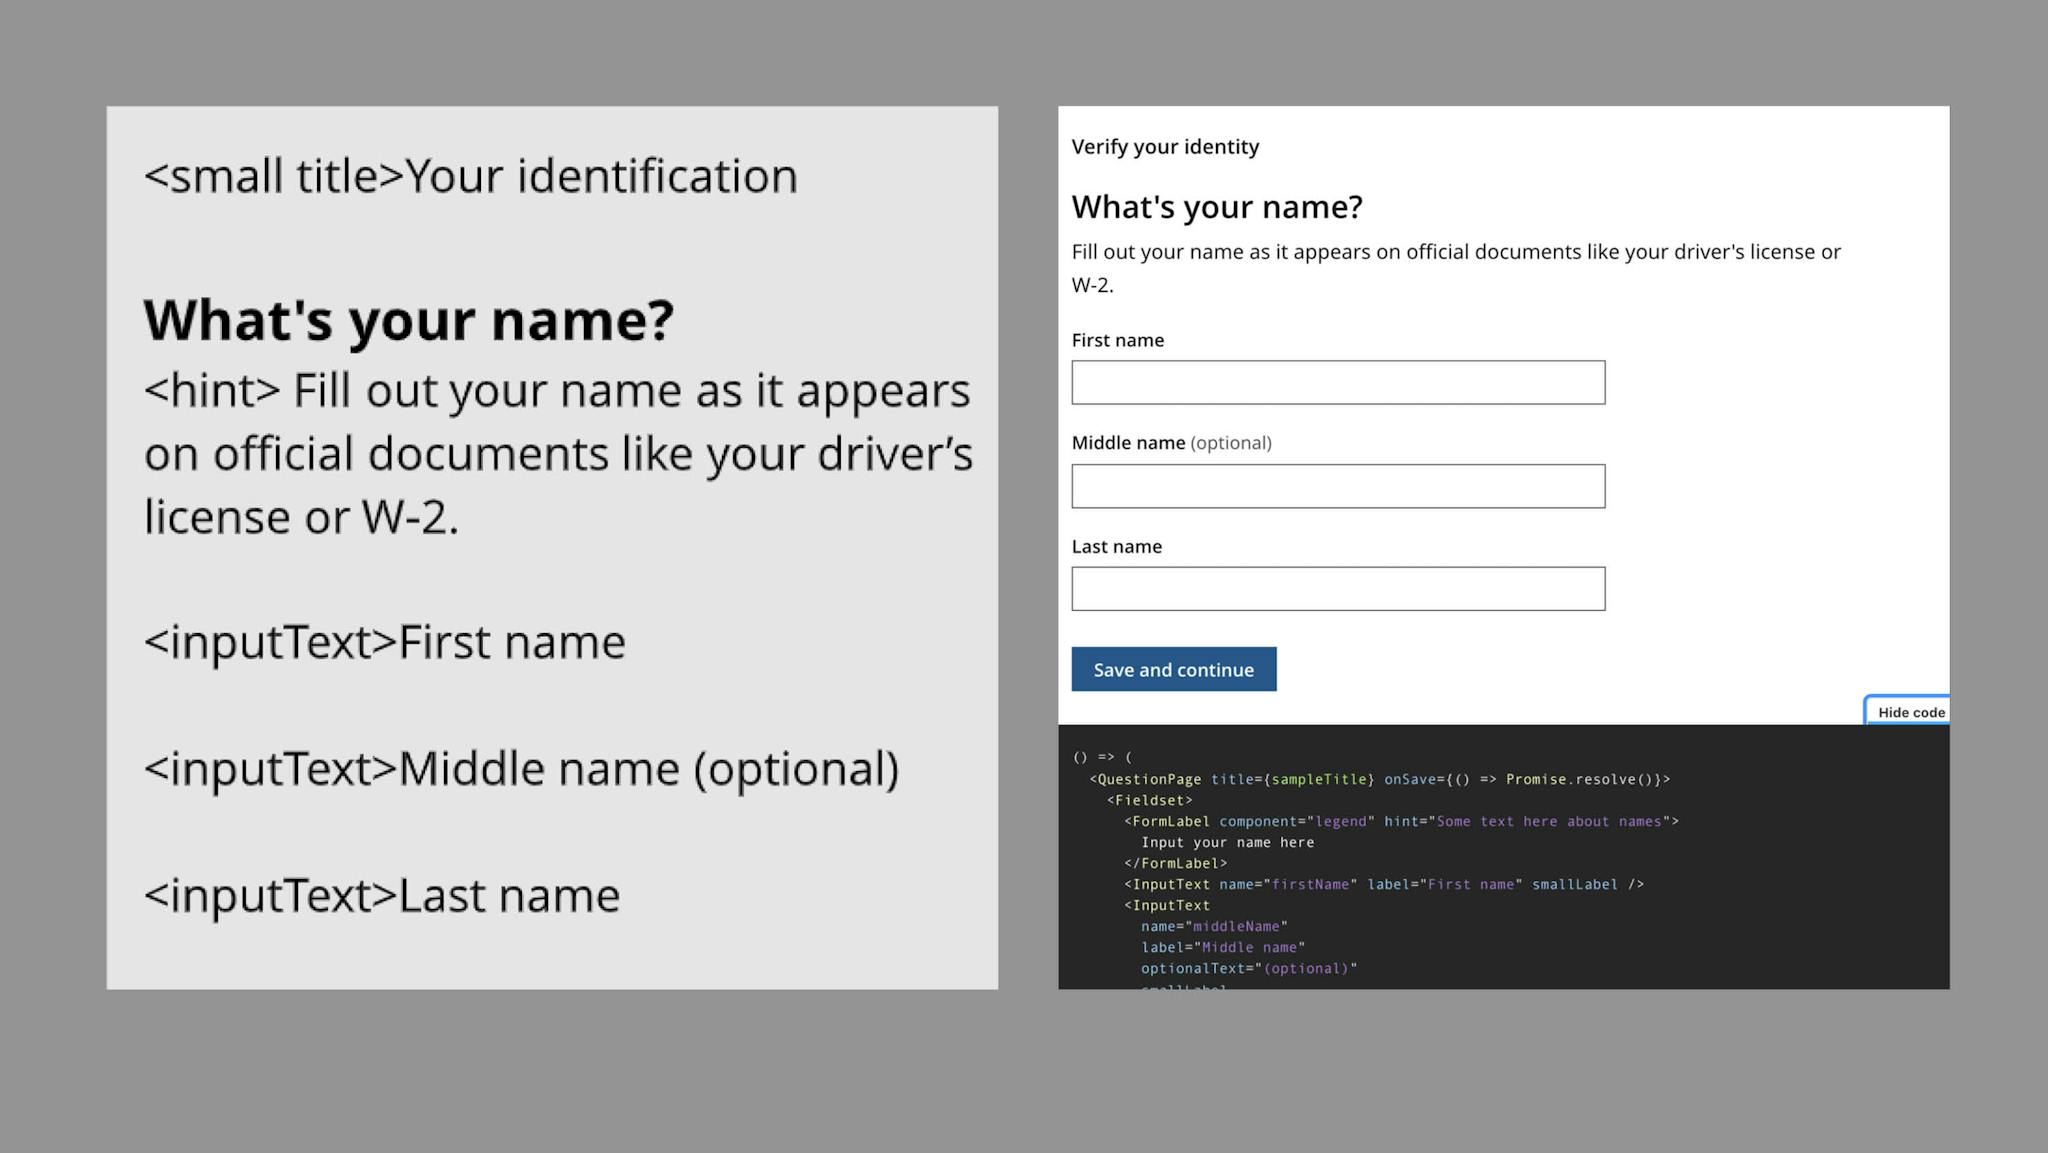 Two different versions of a form featuring the question, "What's your name?" are shown in both Lucidchart and in code.